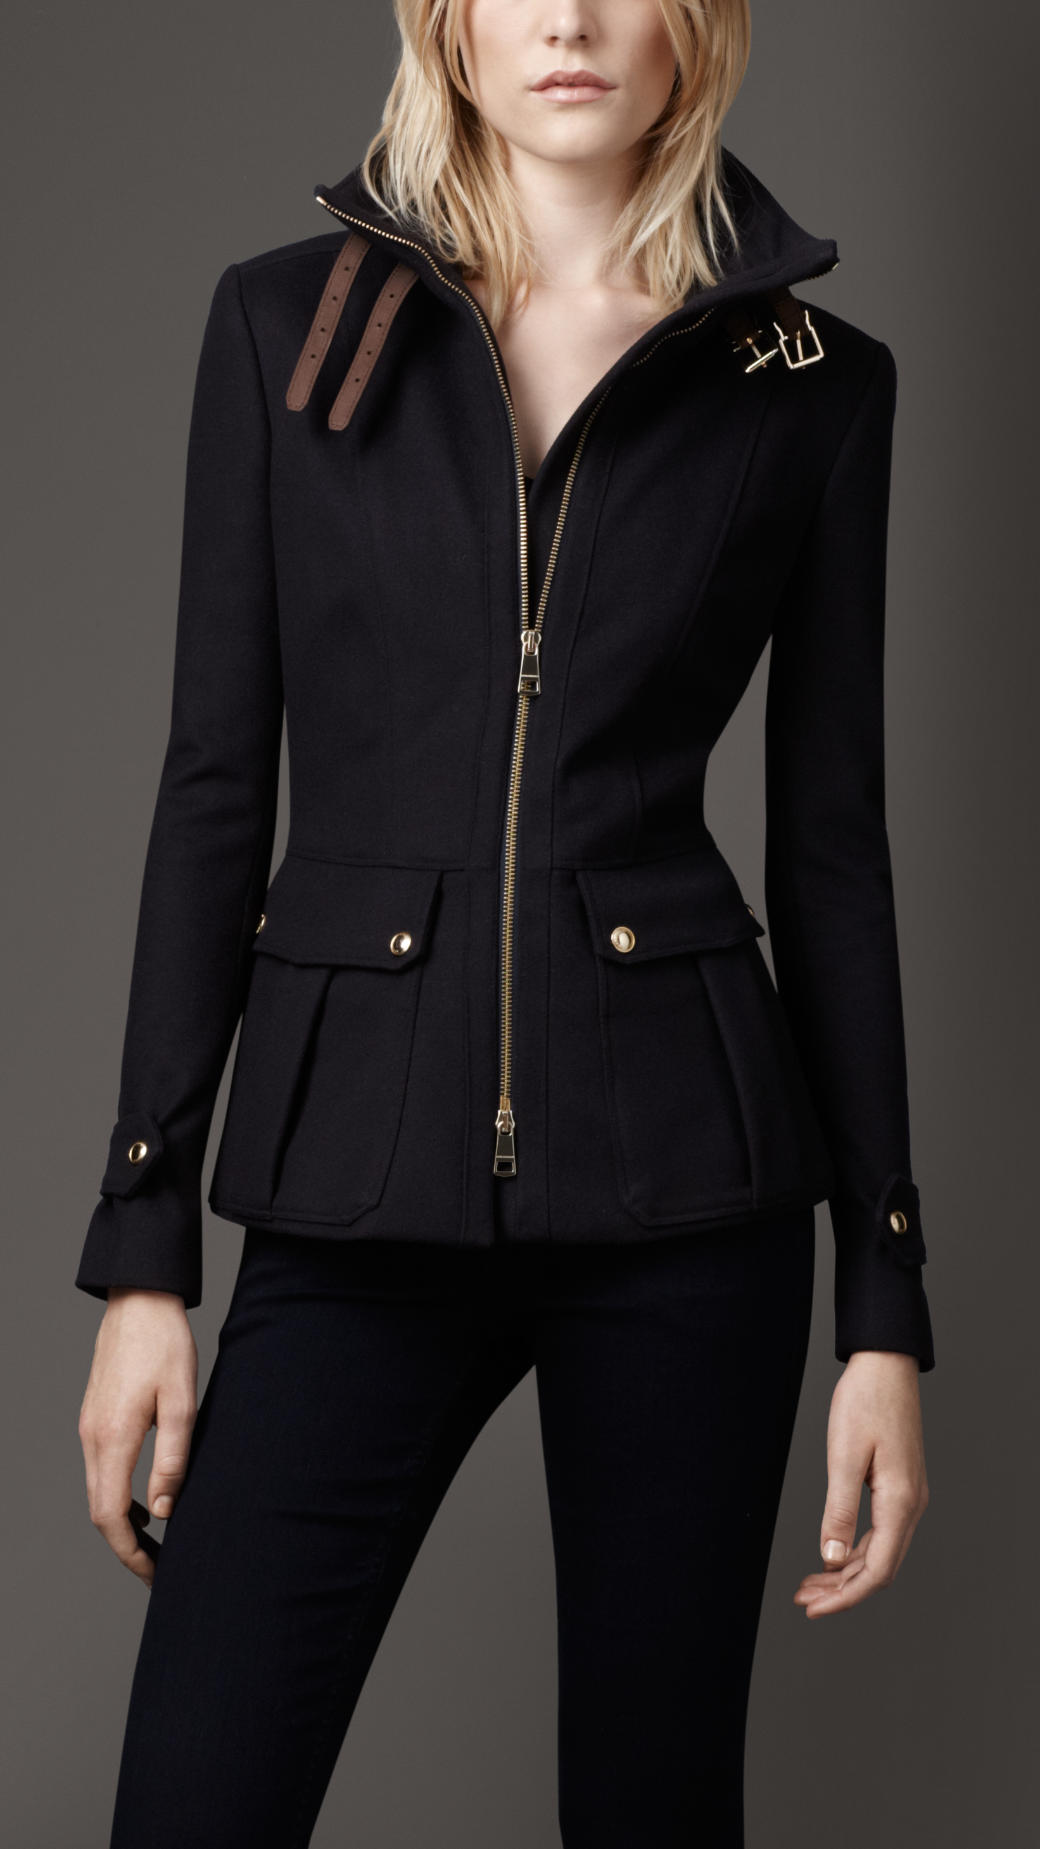 Lyst - Burberry Funnel Neck Military Jacket in Black